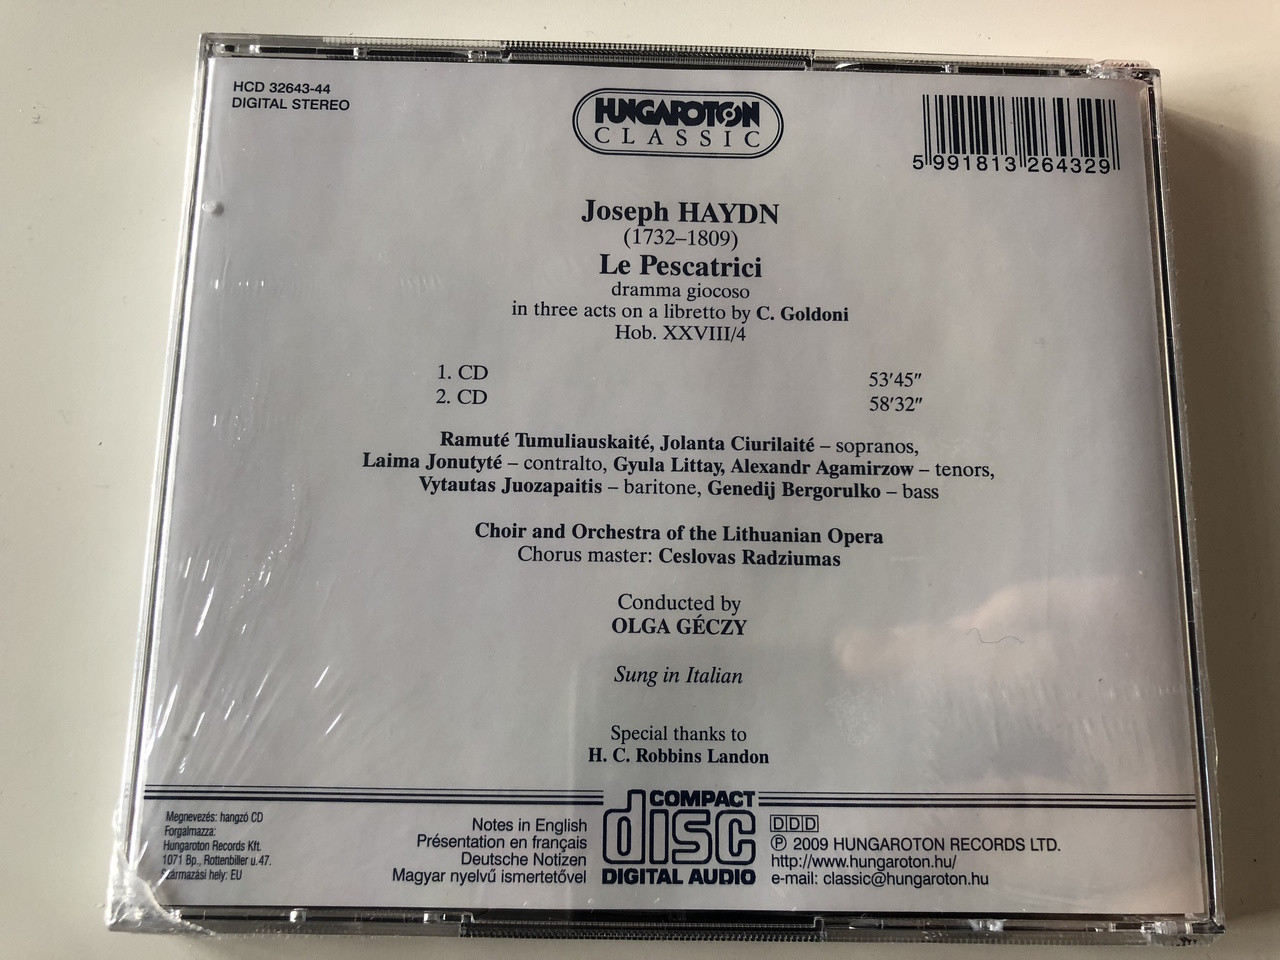 Joseph Haydn - Le Pescatrici / Audio CD Hungaroton Classis / HCD 32643-44 /  Choir and Orchestra of the Lithuanian Opera Conducted by Olga Géczy / Sung